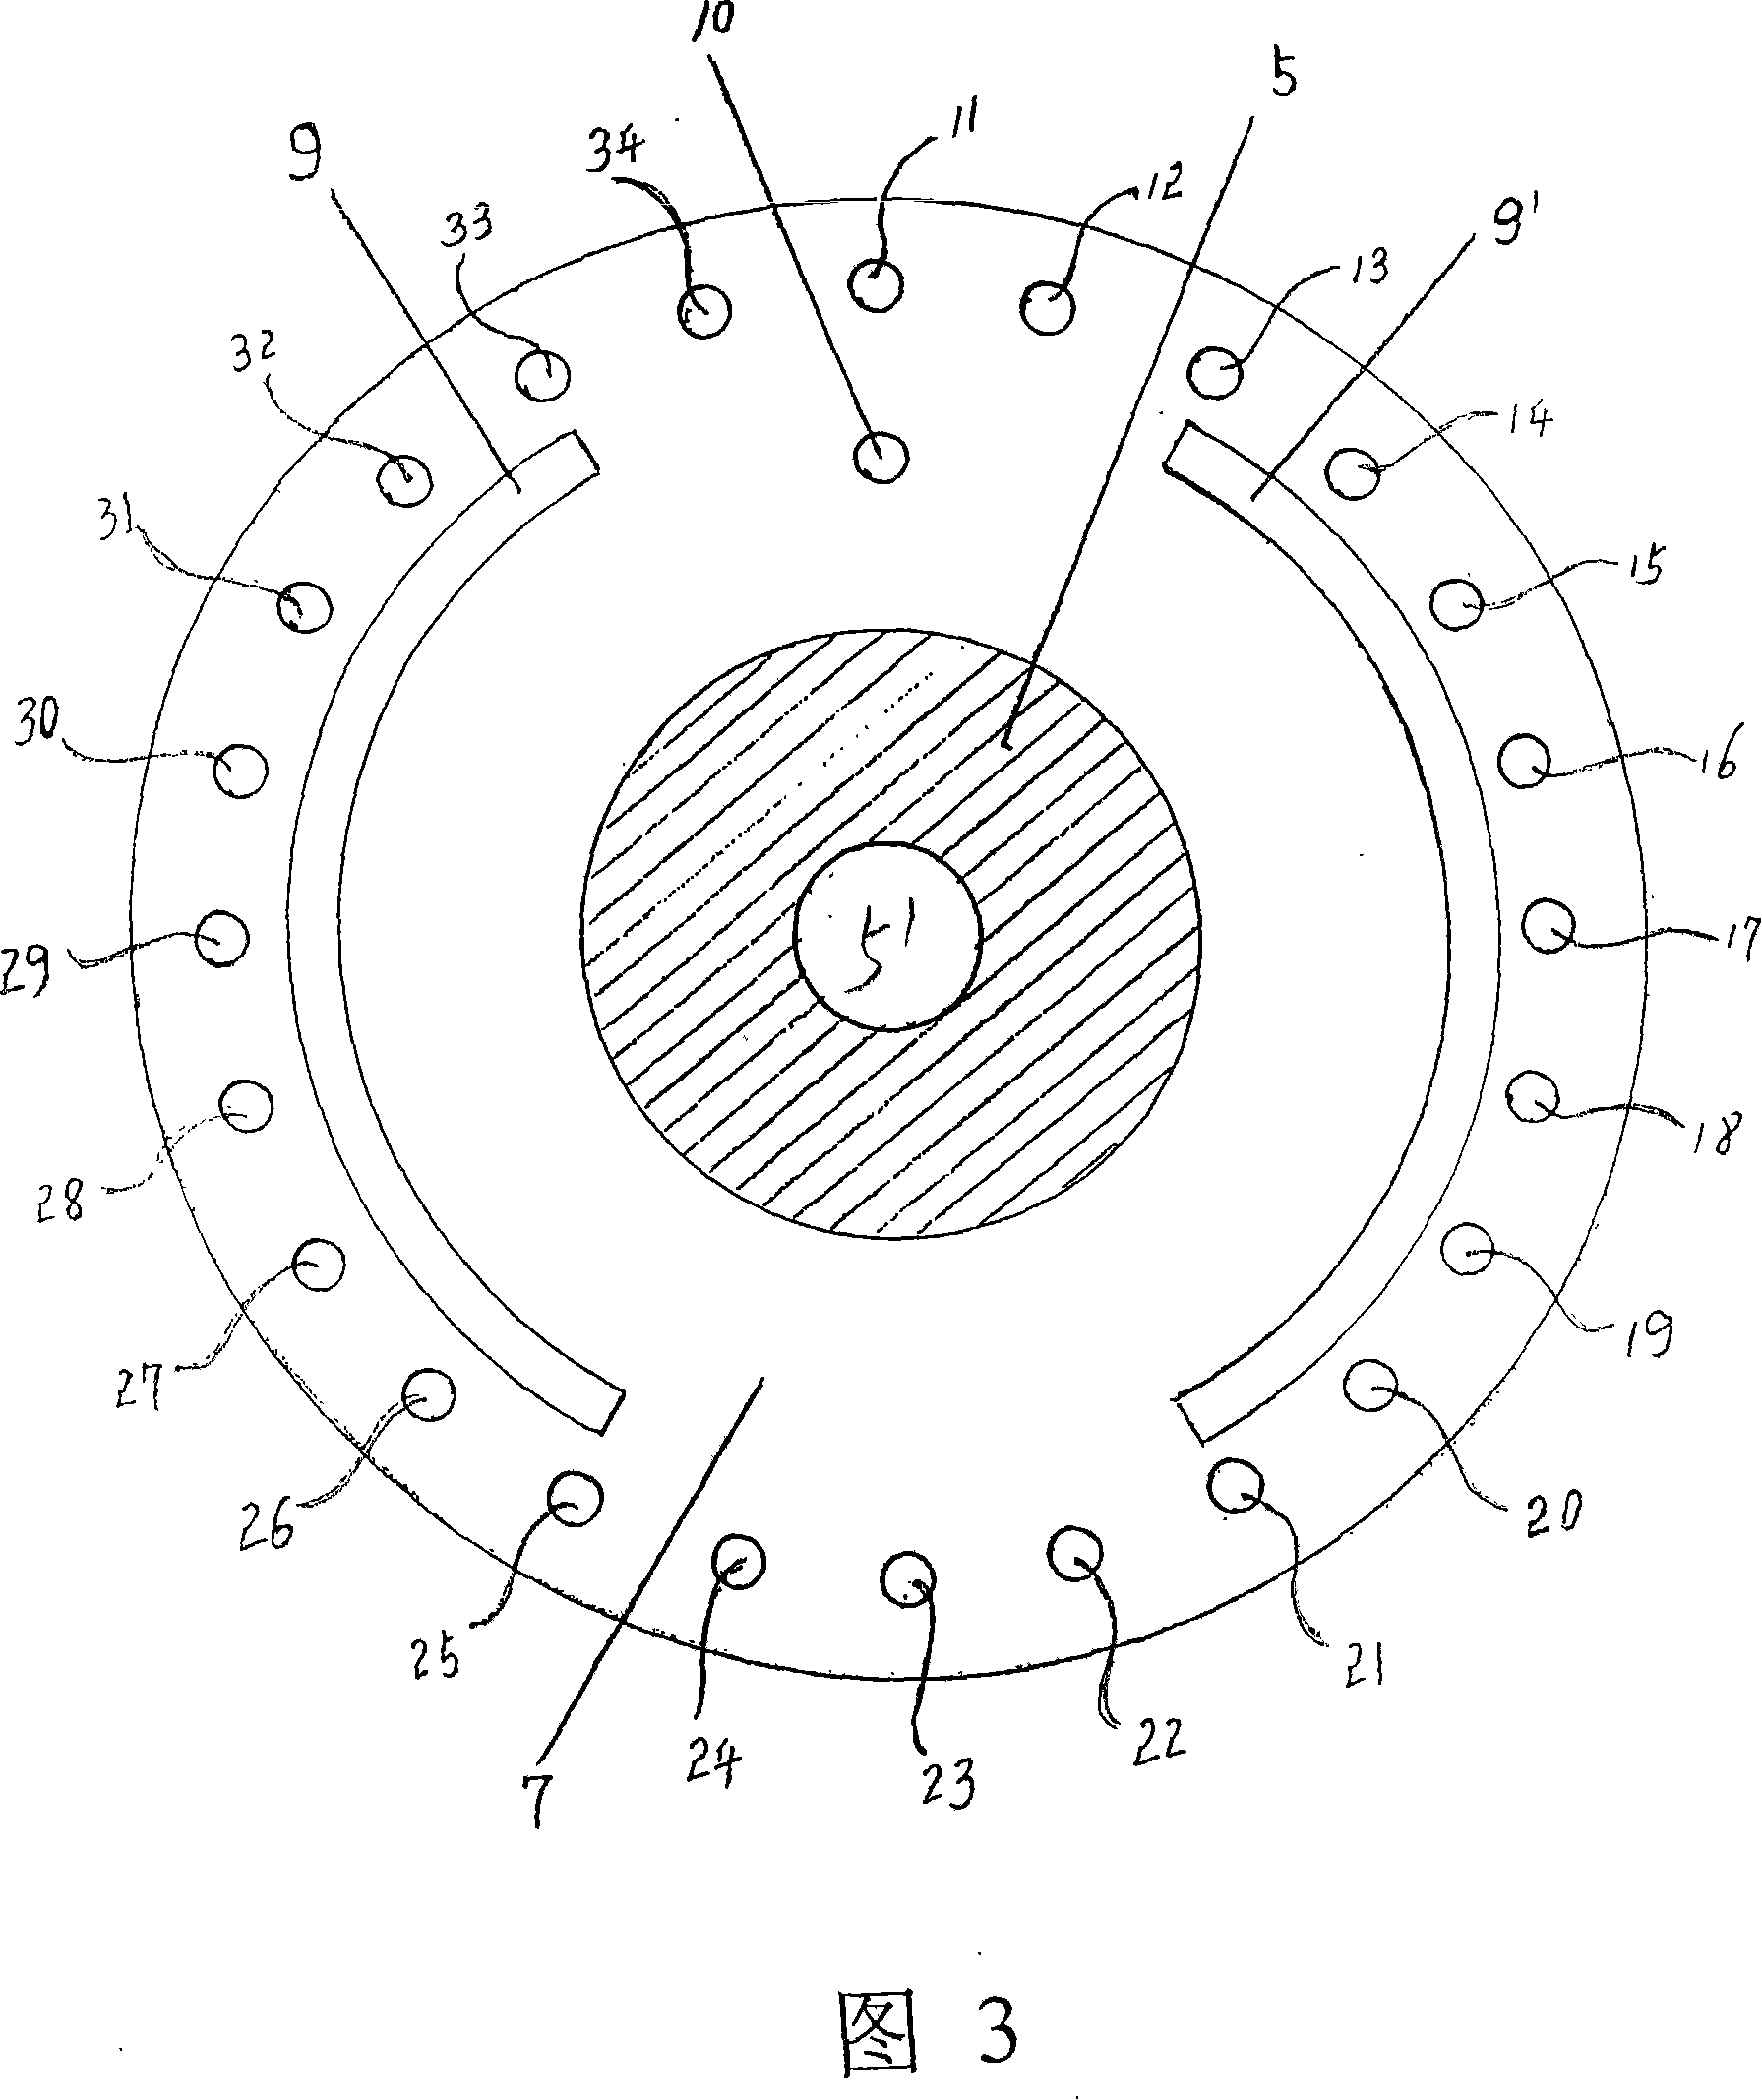 Reluctance motor and self-control optical coupled switch and motion control, structure damp and radiating method